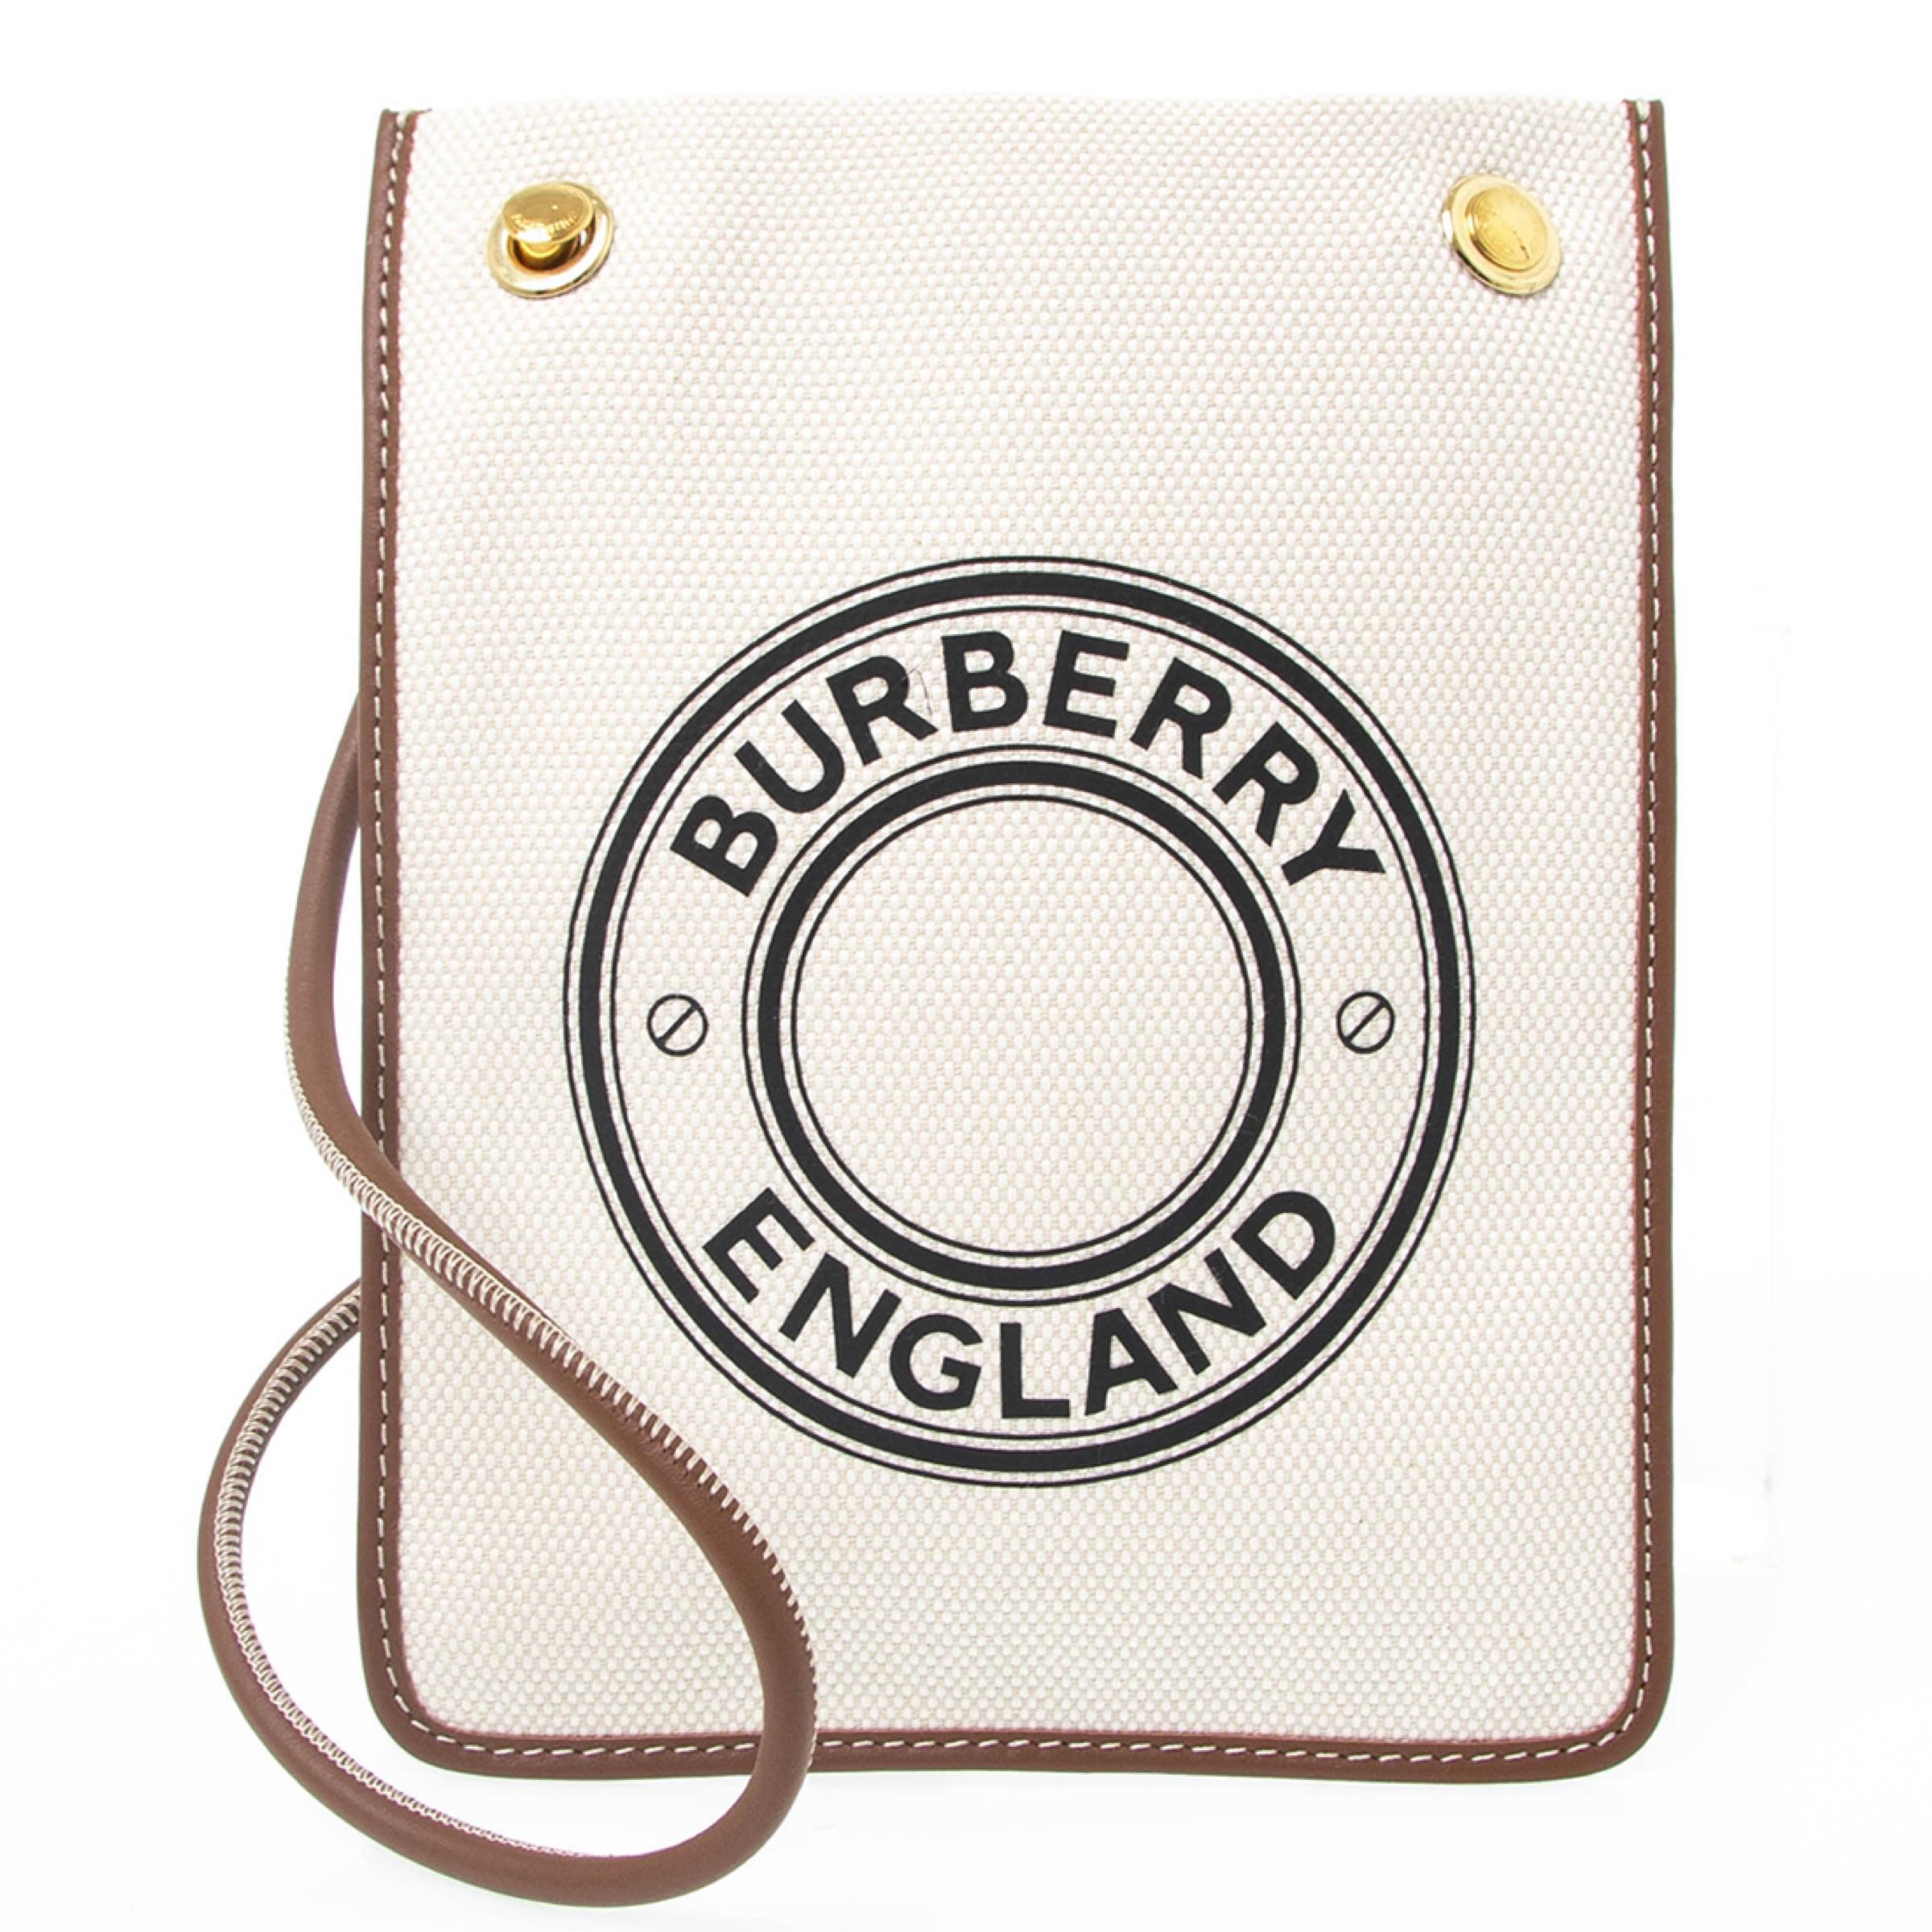 New Burberry White Printed Logo Mini Canvas Flat Crossbody Bag

Authenticity Guaranteed

DETAILS
Brand: Burberry
Condition: Brand new
Gender: Women
Category: Crossbody bag
Color: White
Material: Canvas
Printed logo
Leather shoulder strap
1 main